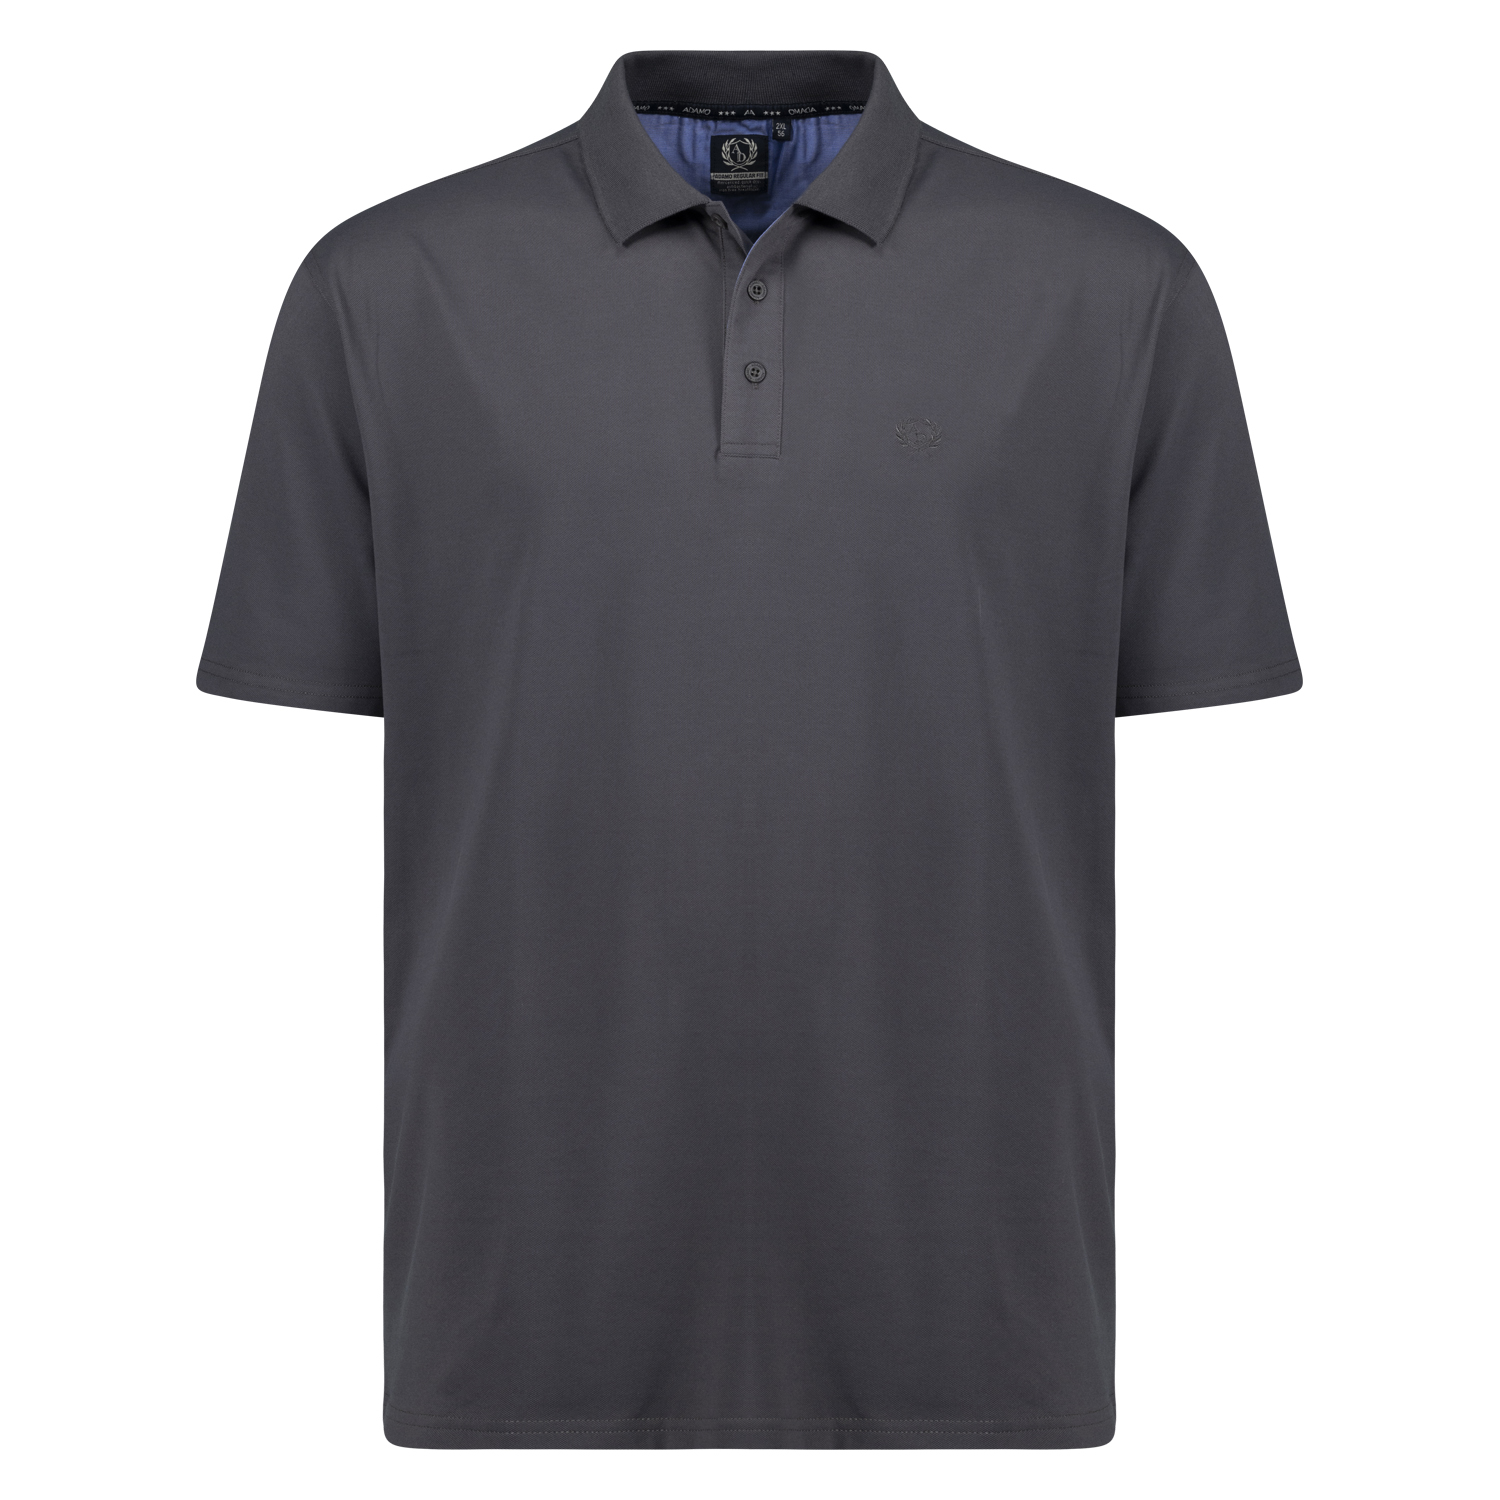 Anthracite short sleeve polo shirt PICCO by ADAMO for men in large sizes up to 12XL